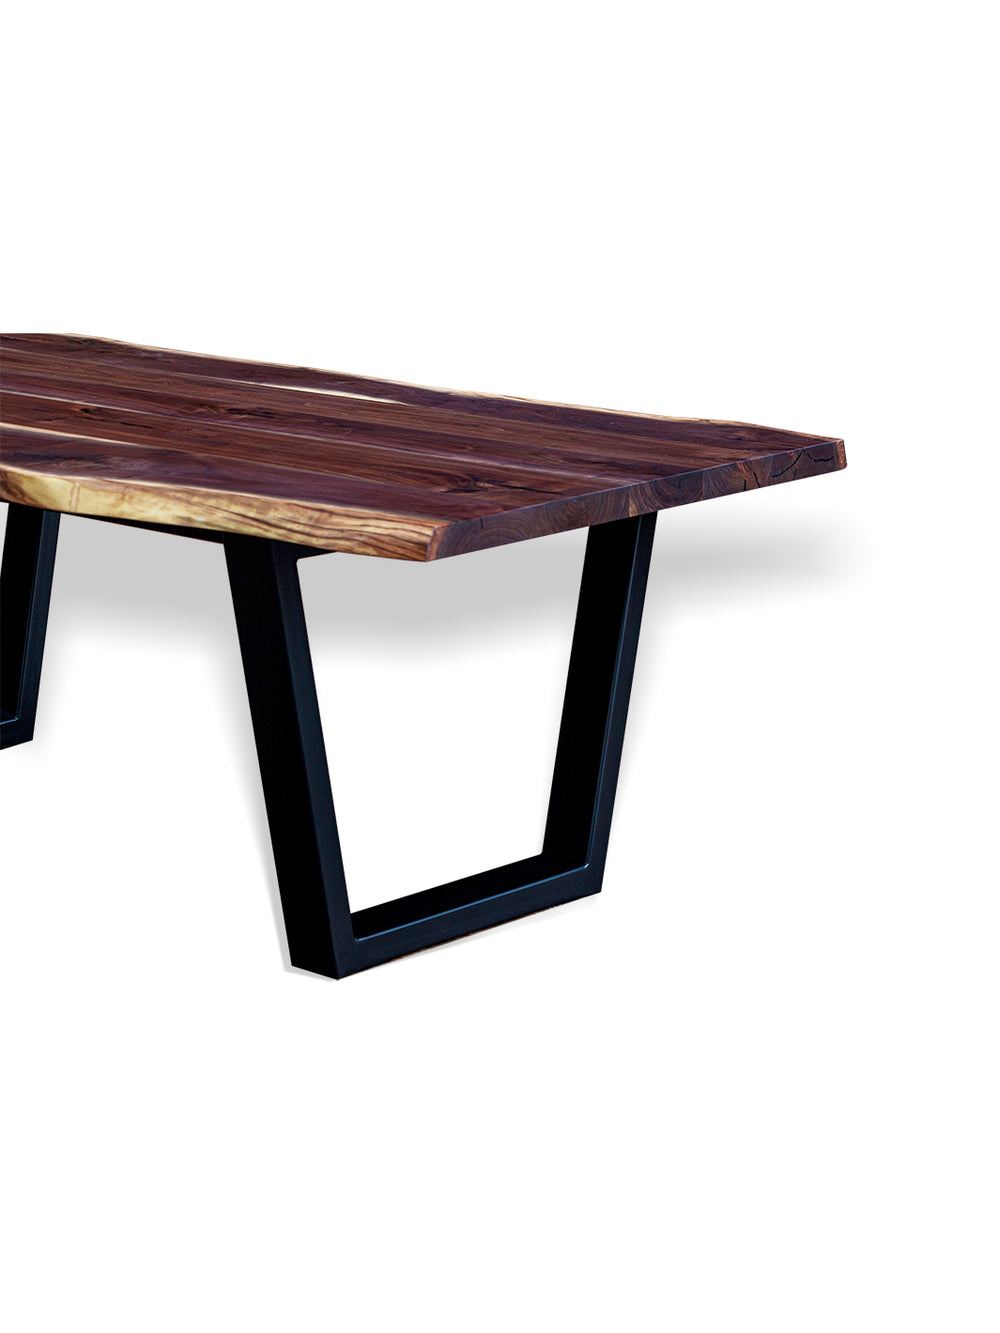 Modern Live Edge Walnut Dining Table with Black Tapered Steel Legs Earthly Comfort Dining Tables 604-1